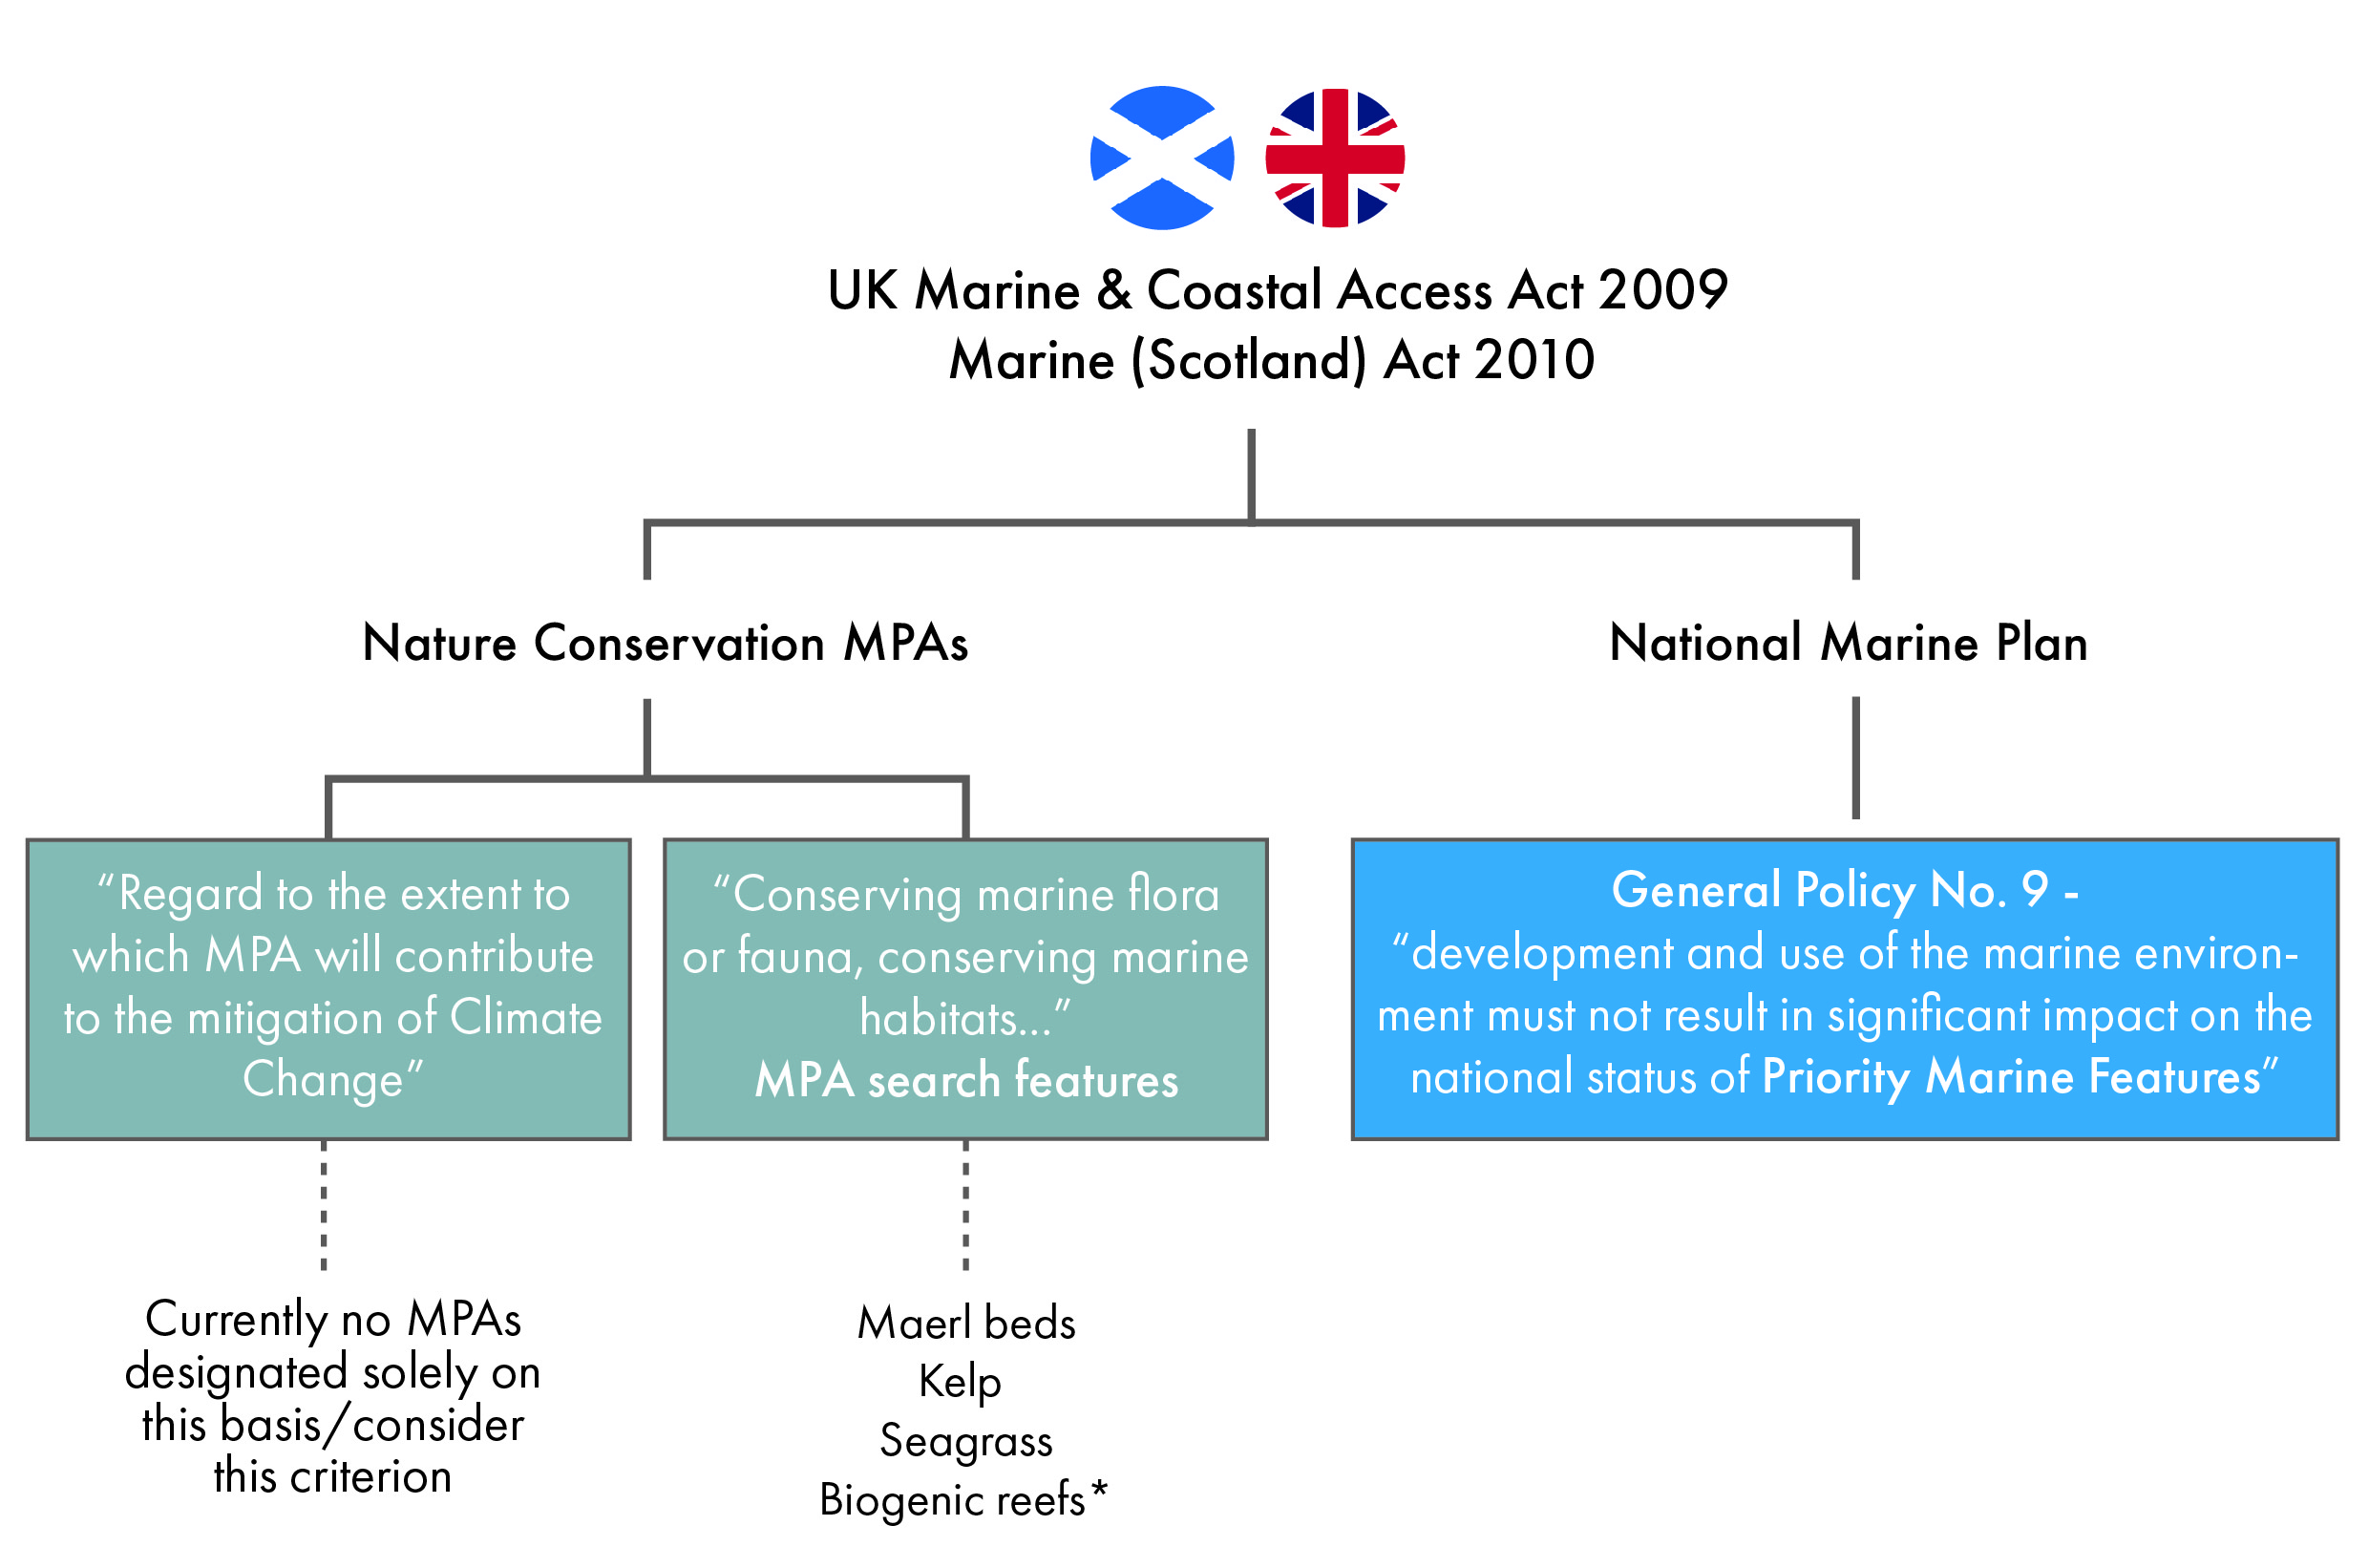 Diagram showing the current protection, and opportunities for protection, of listed blue carbon species/habitats under the Marine Acts (UK Marine & Coastal Access Act 2009 and Marine (Scotland) Act 2010).